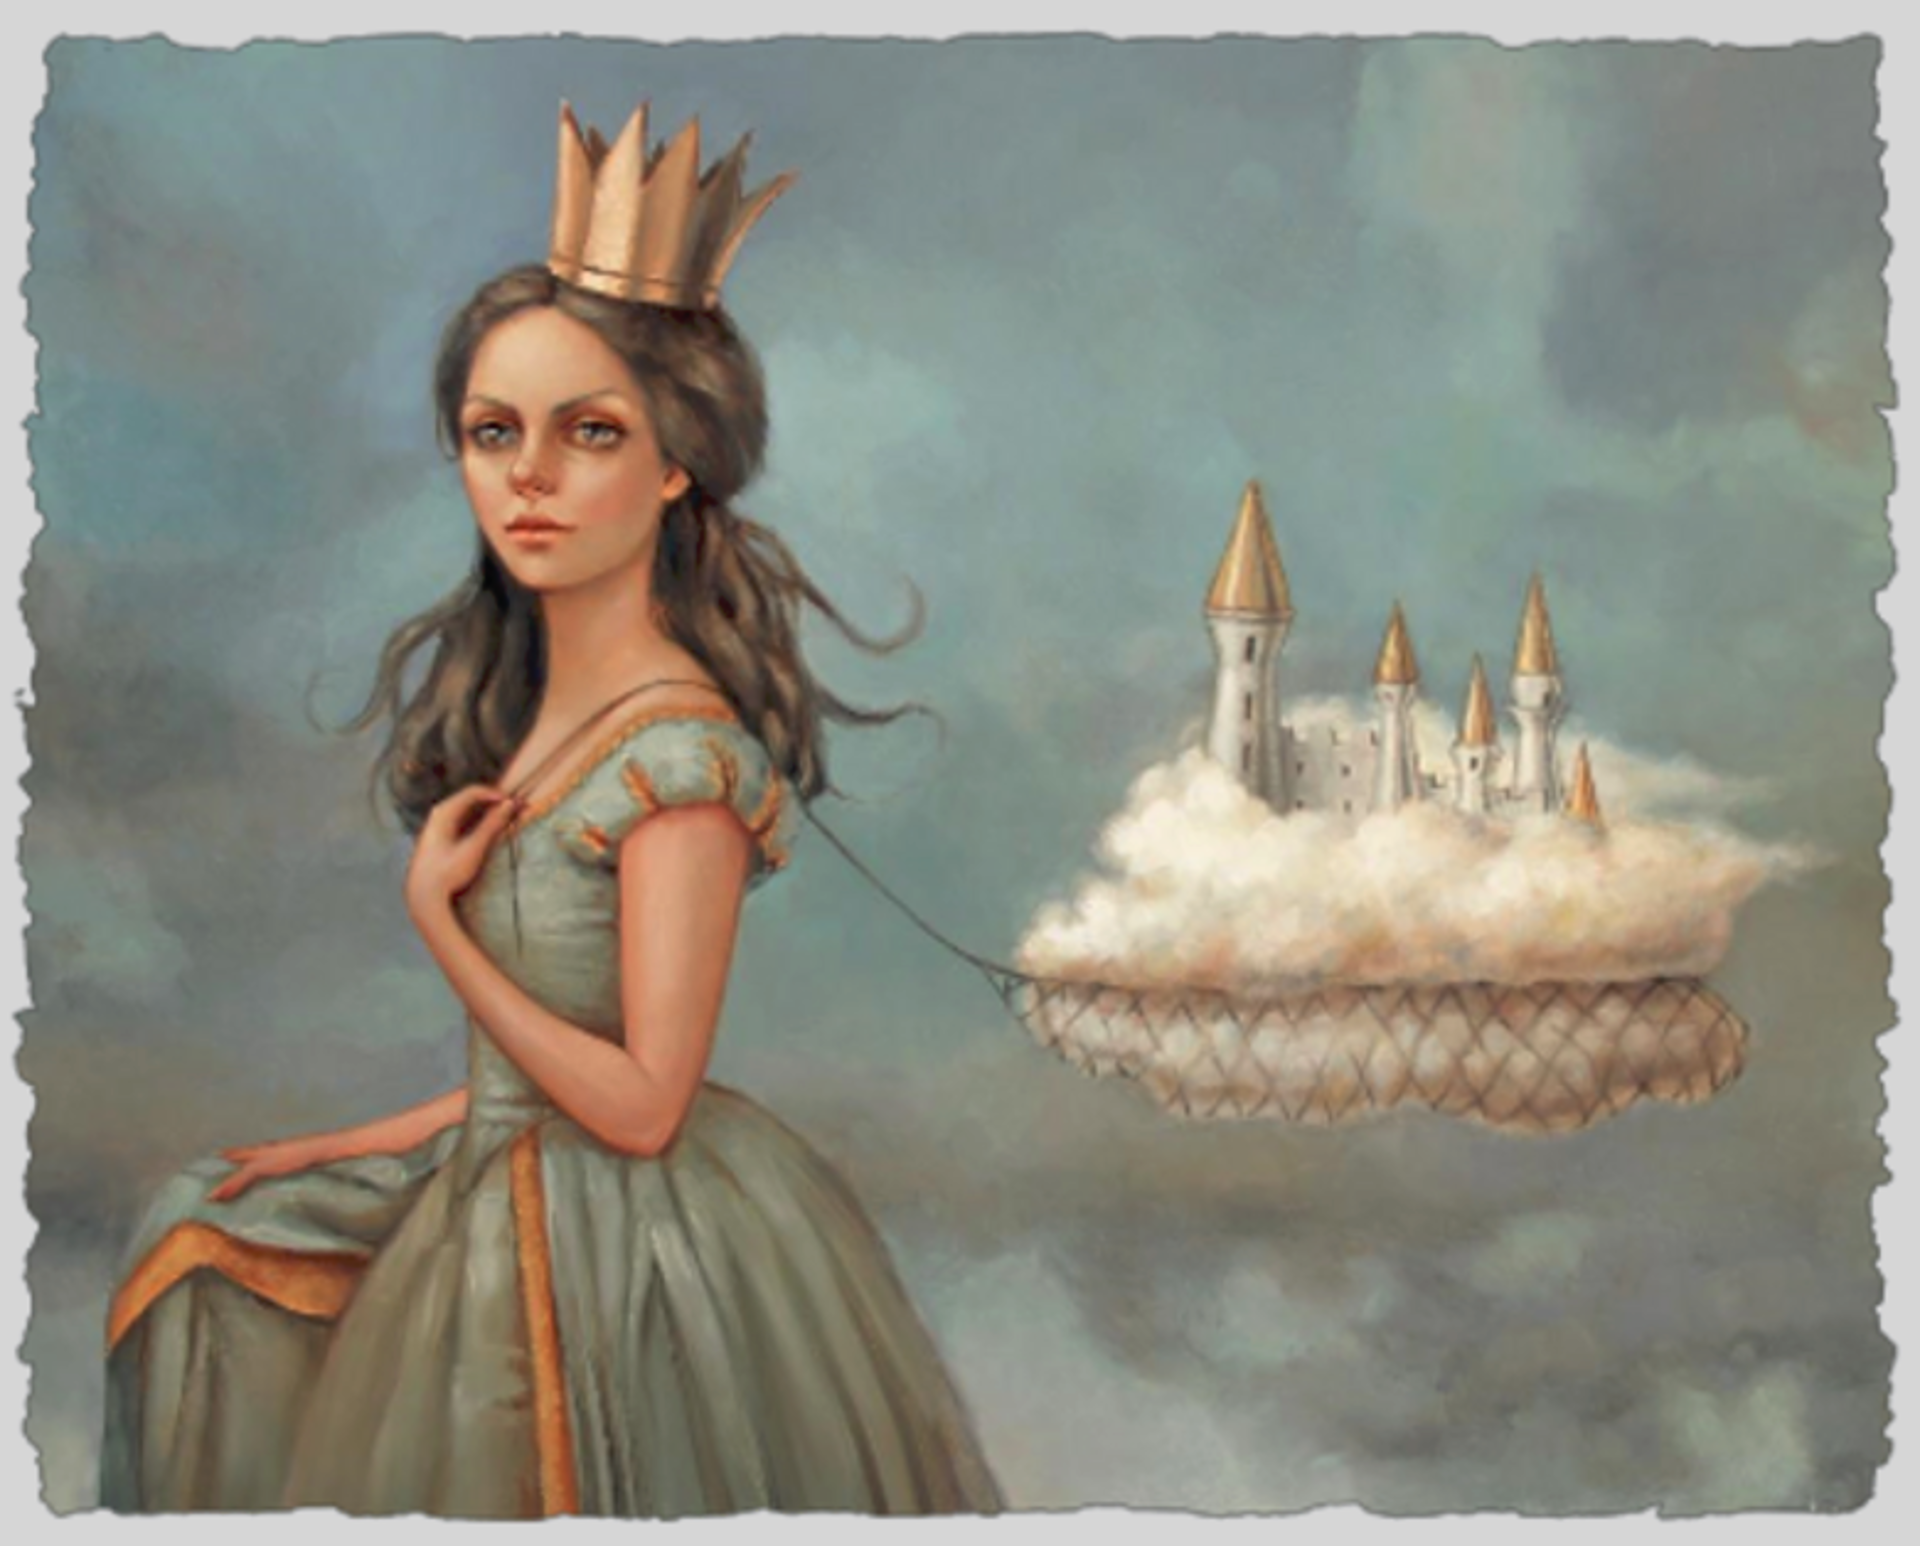 Castle in the Clouds (Giclee on Deckled Paper) G.O. by Liese Chavez